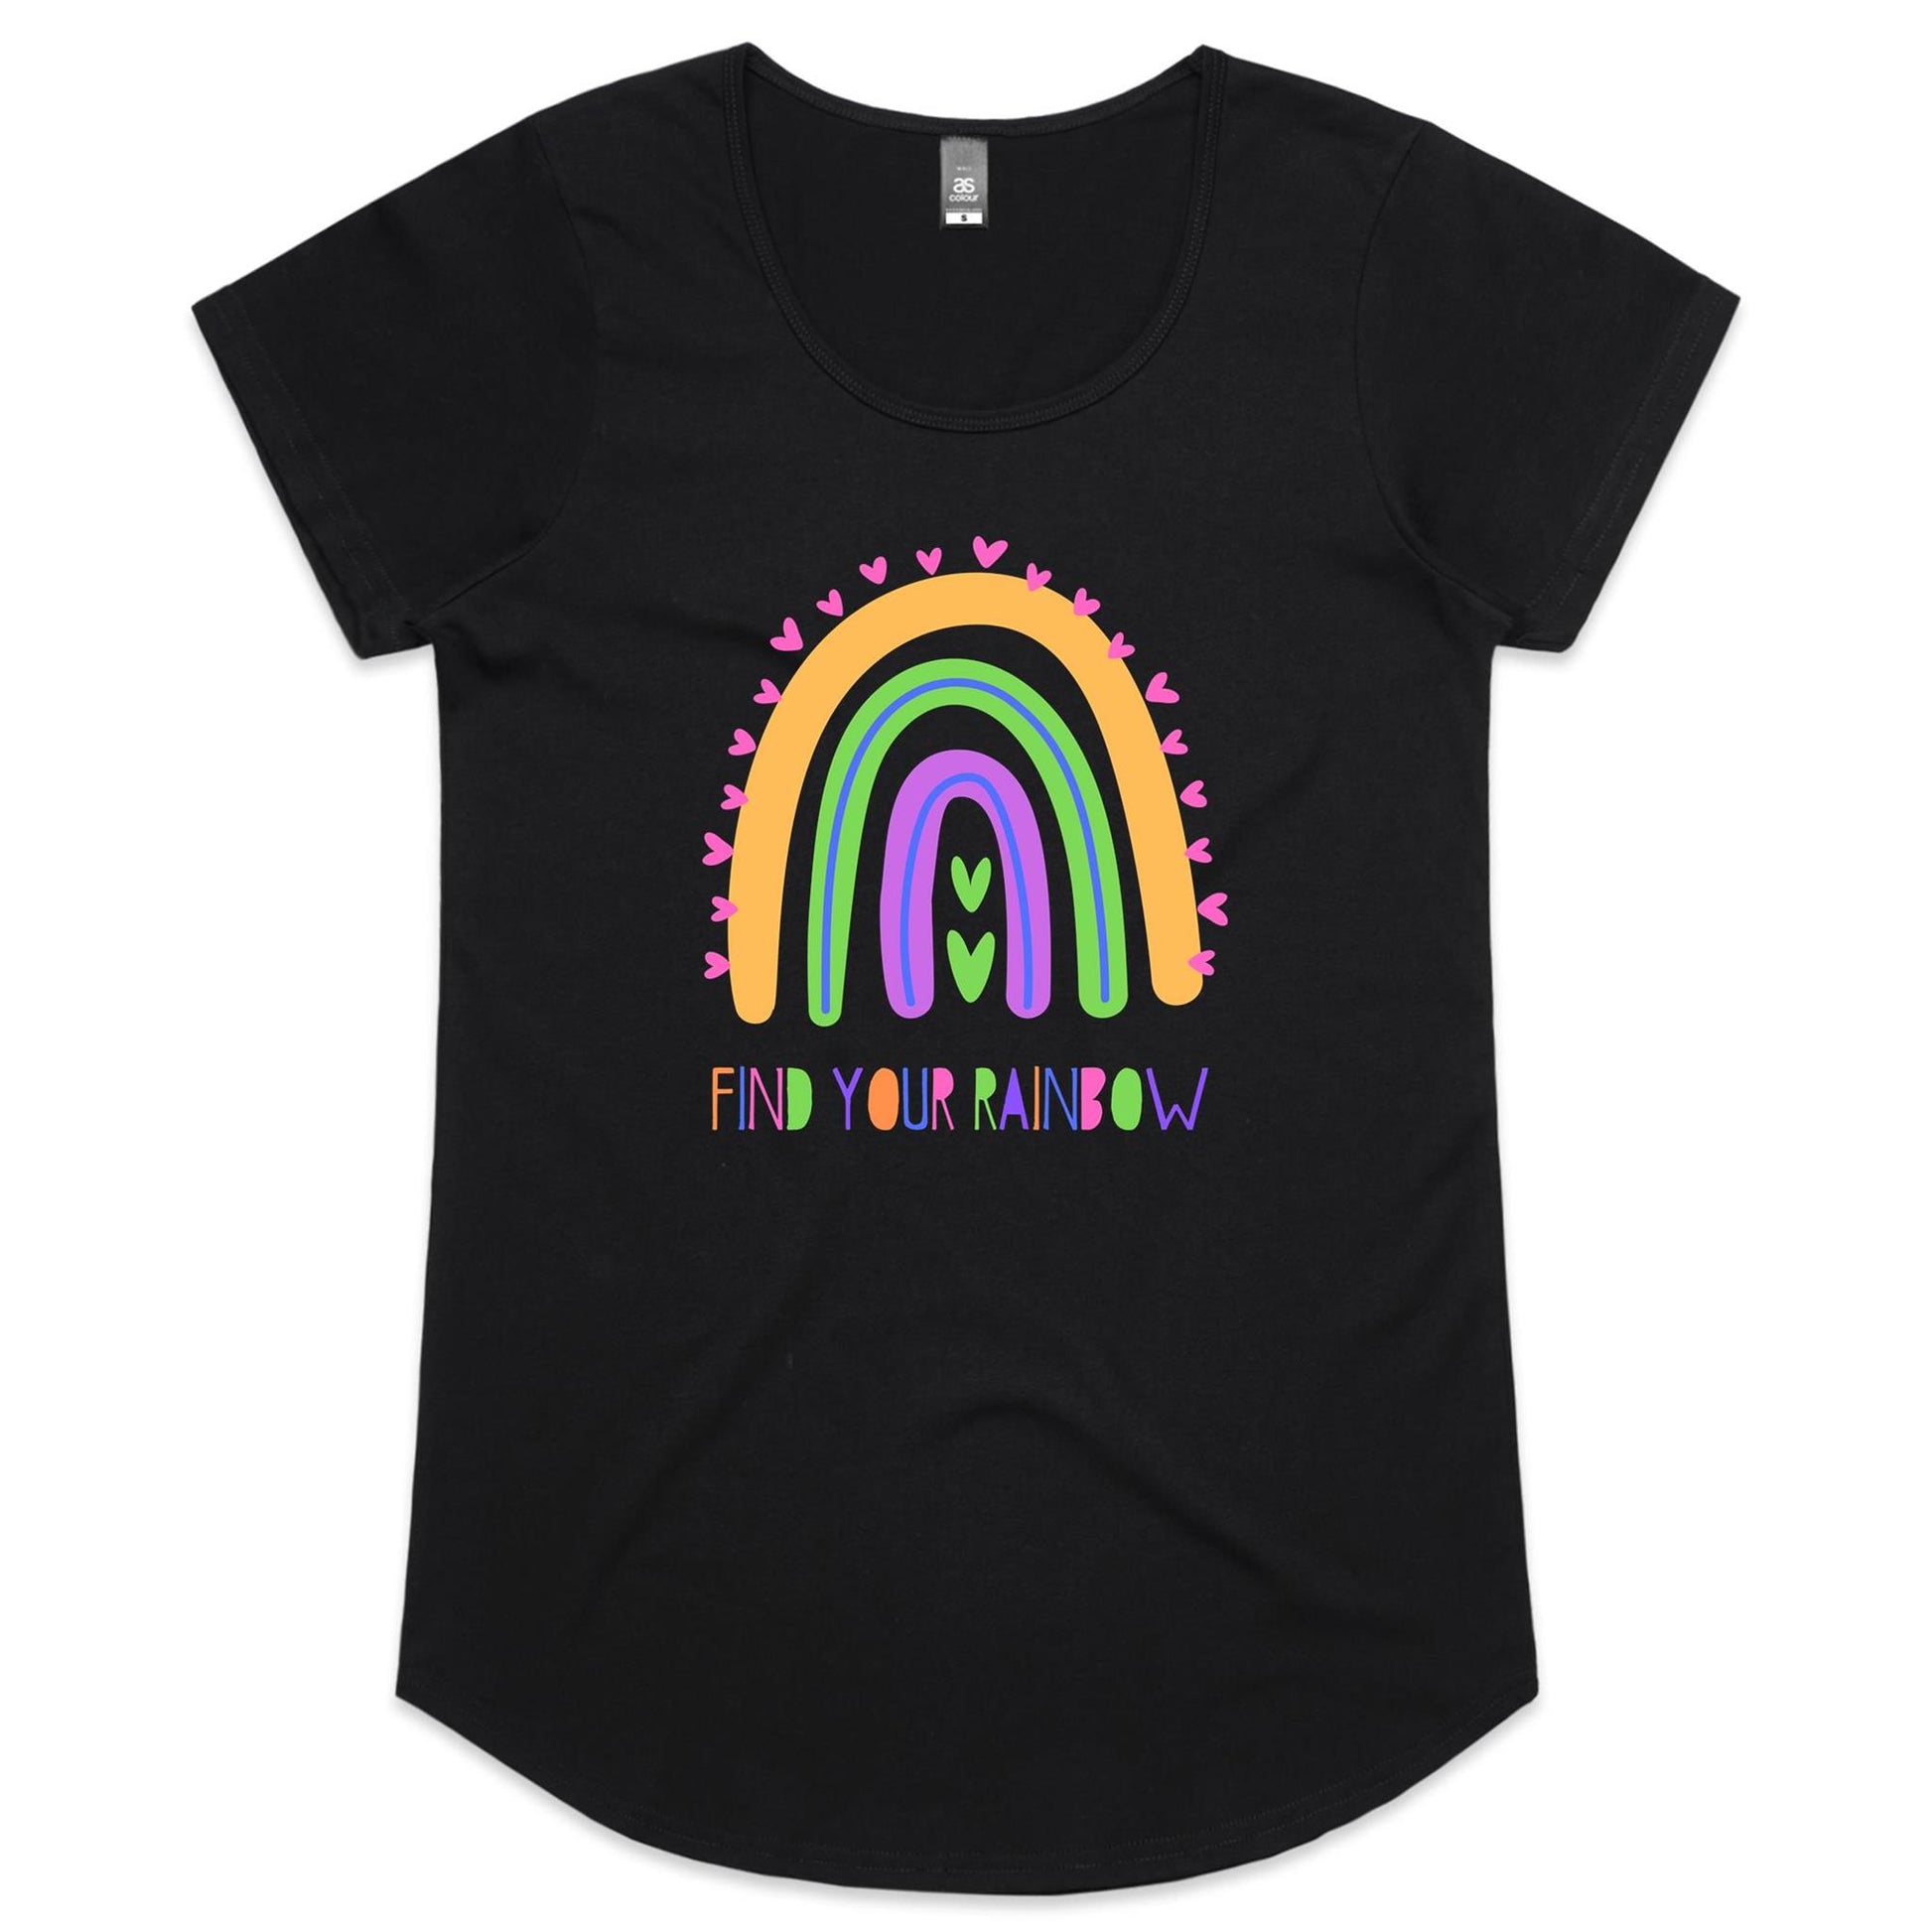 Find Your Rainbow - Womens Scoop Neck T-Shirt Black Womens Scoop Neck T-shirt Womens